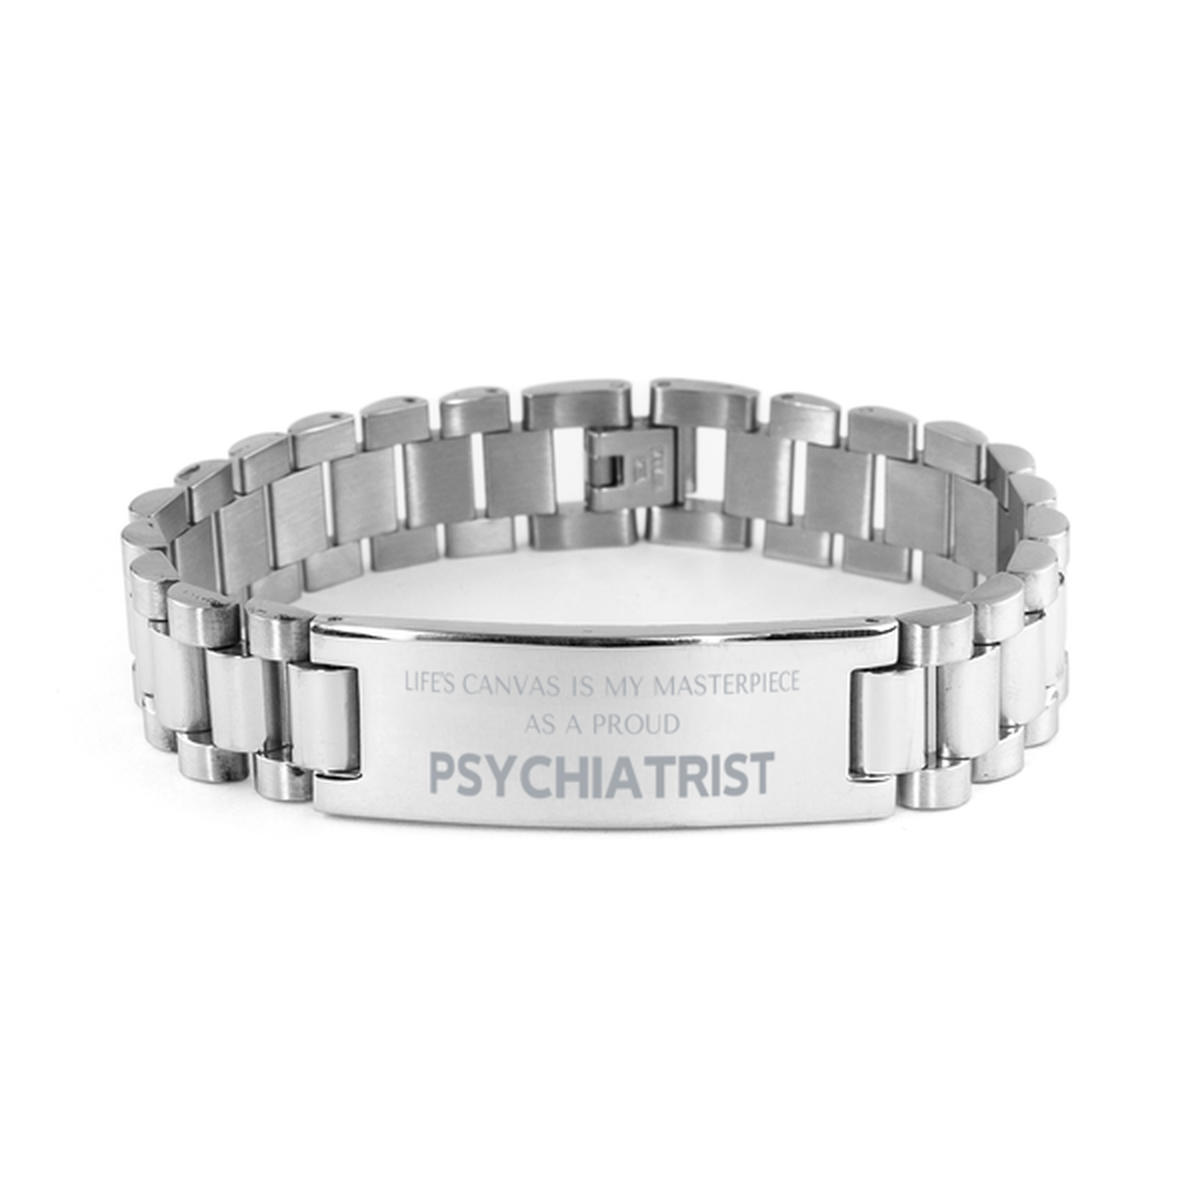 Proud Psychiatrist Gifts, Life's canvas is my masterpiece, Epic Birthday Christmas Unique Ladder Stainless Steel Bracelet For Psychiatrist, Coworkers, Men, Women, Friends